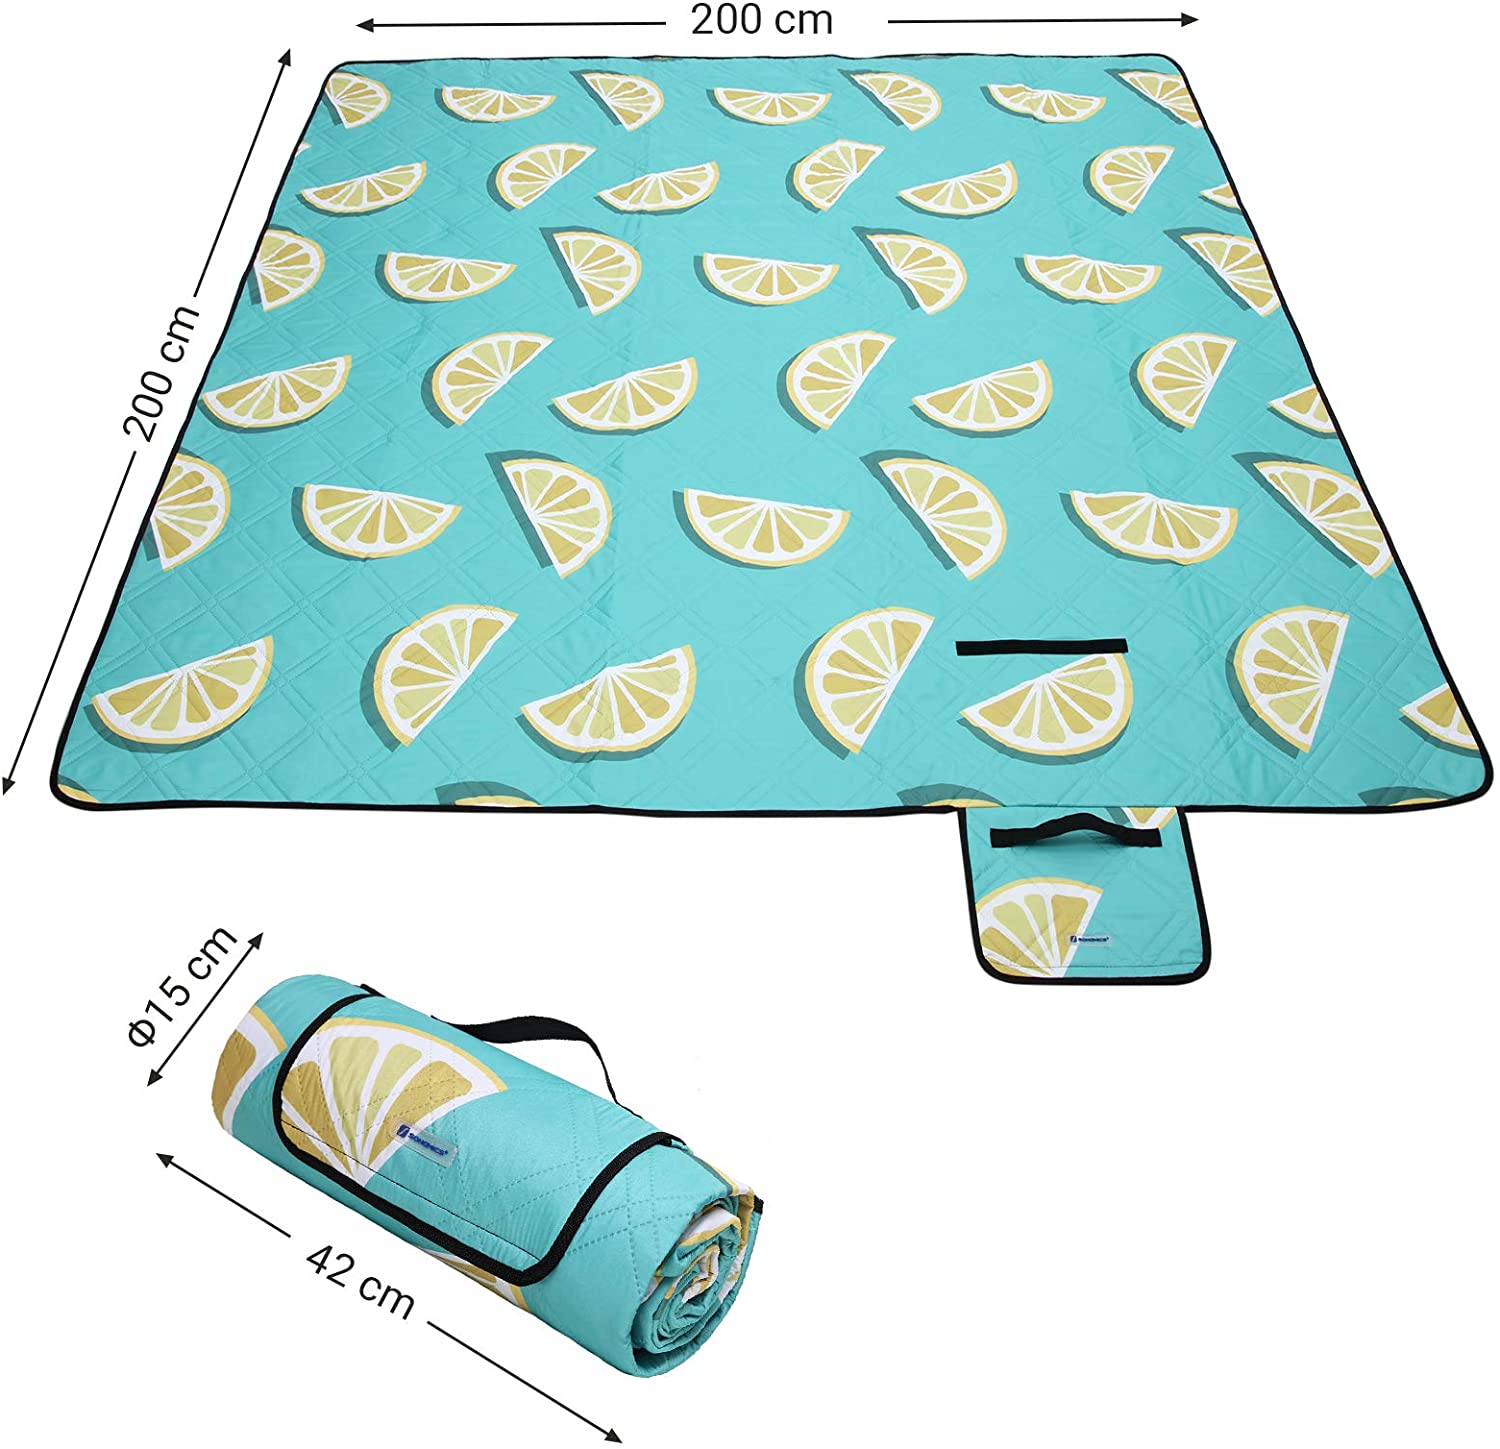 SONGMICS Picnic Blanket Foldable Yard Large Camping Picnic Rug and Mat for Beach Outdoors with Waterproof Layer Park Machine Washable 200 x 200 cm Lemon Pattern GCM87YJ